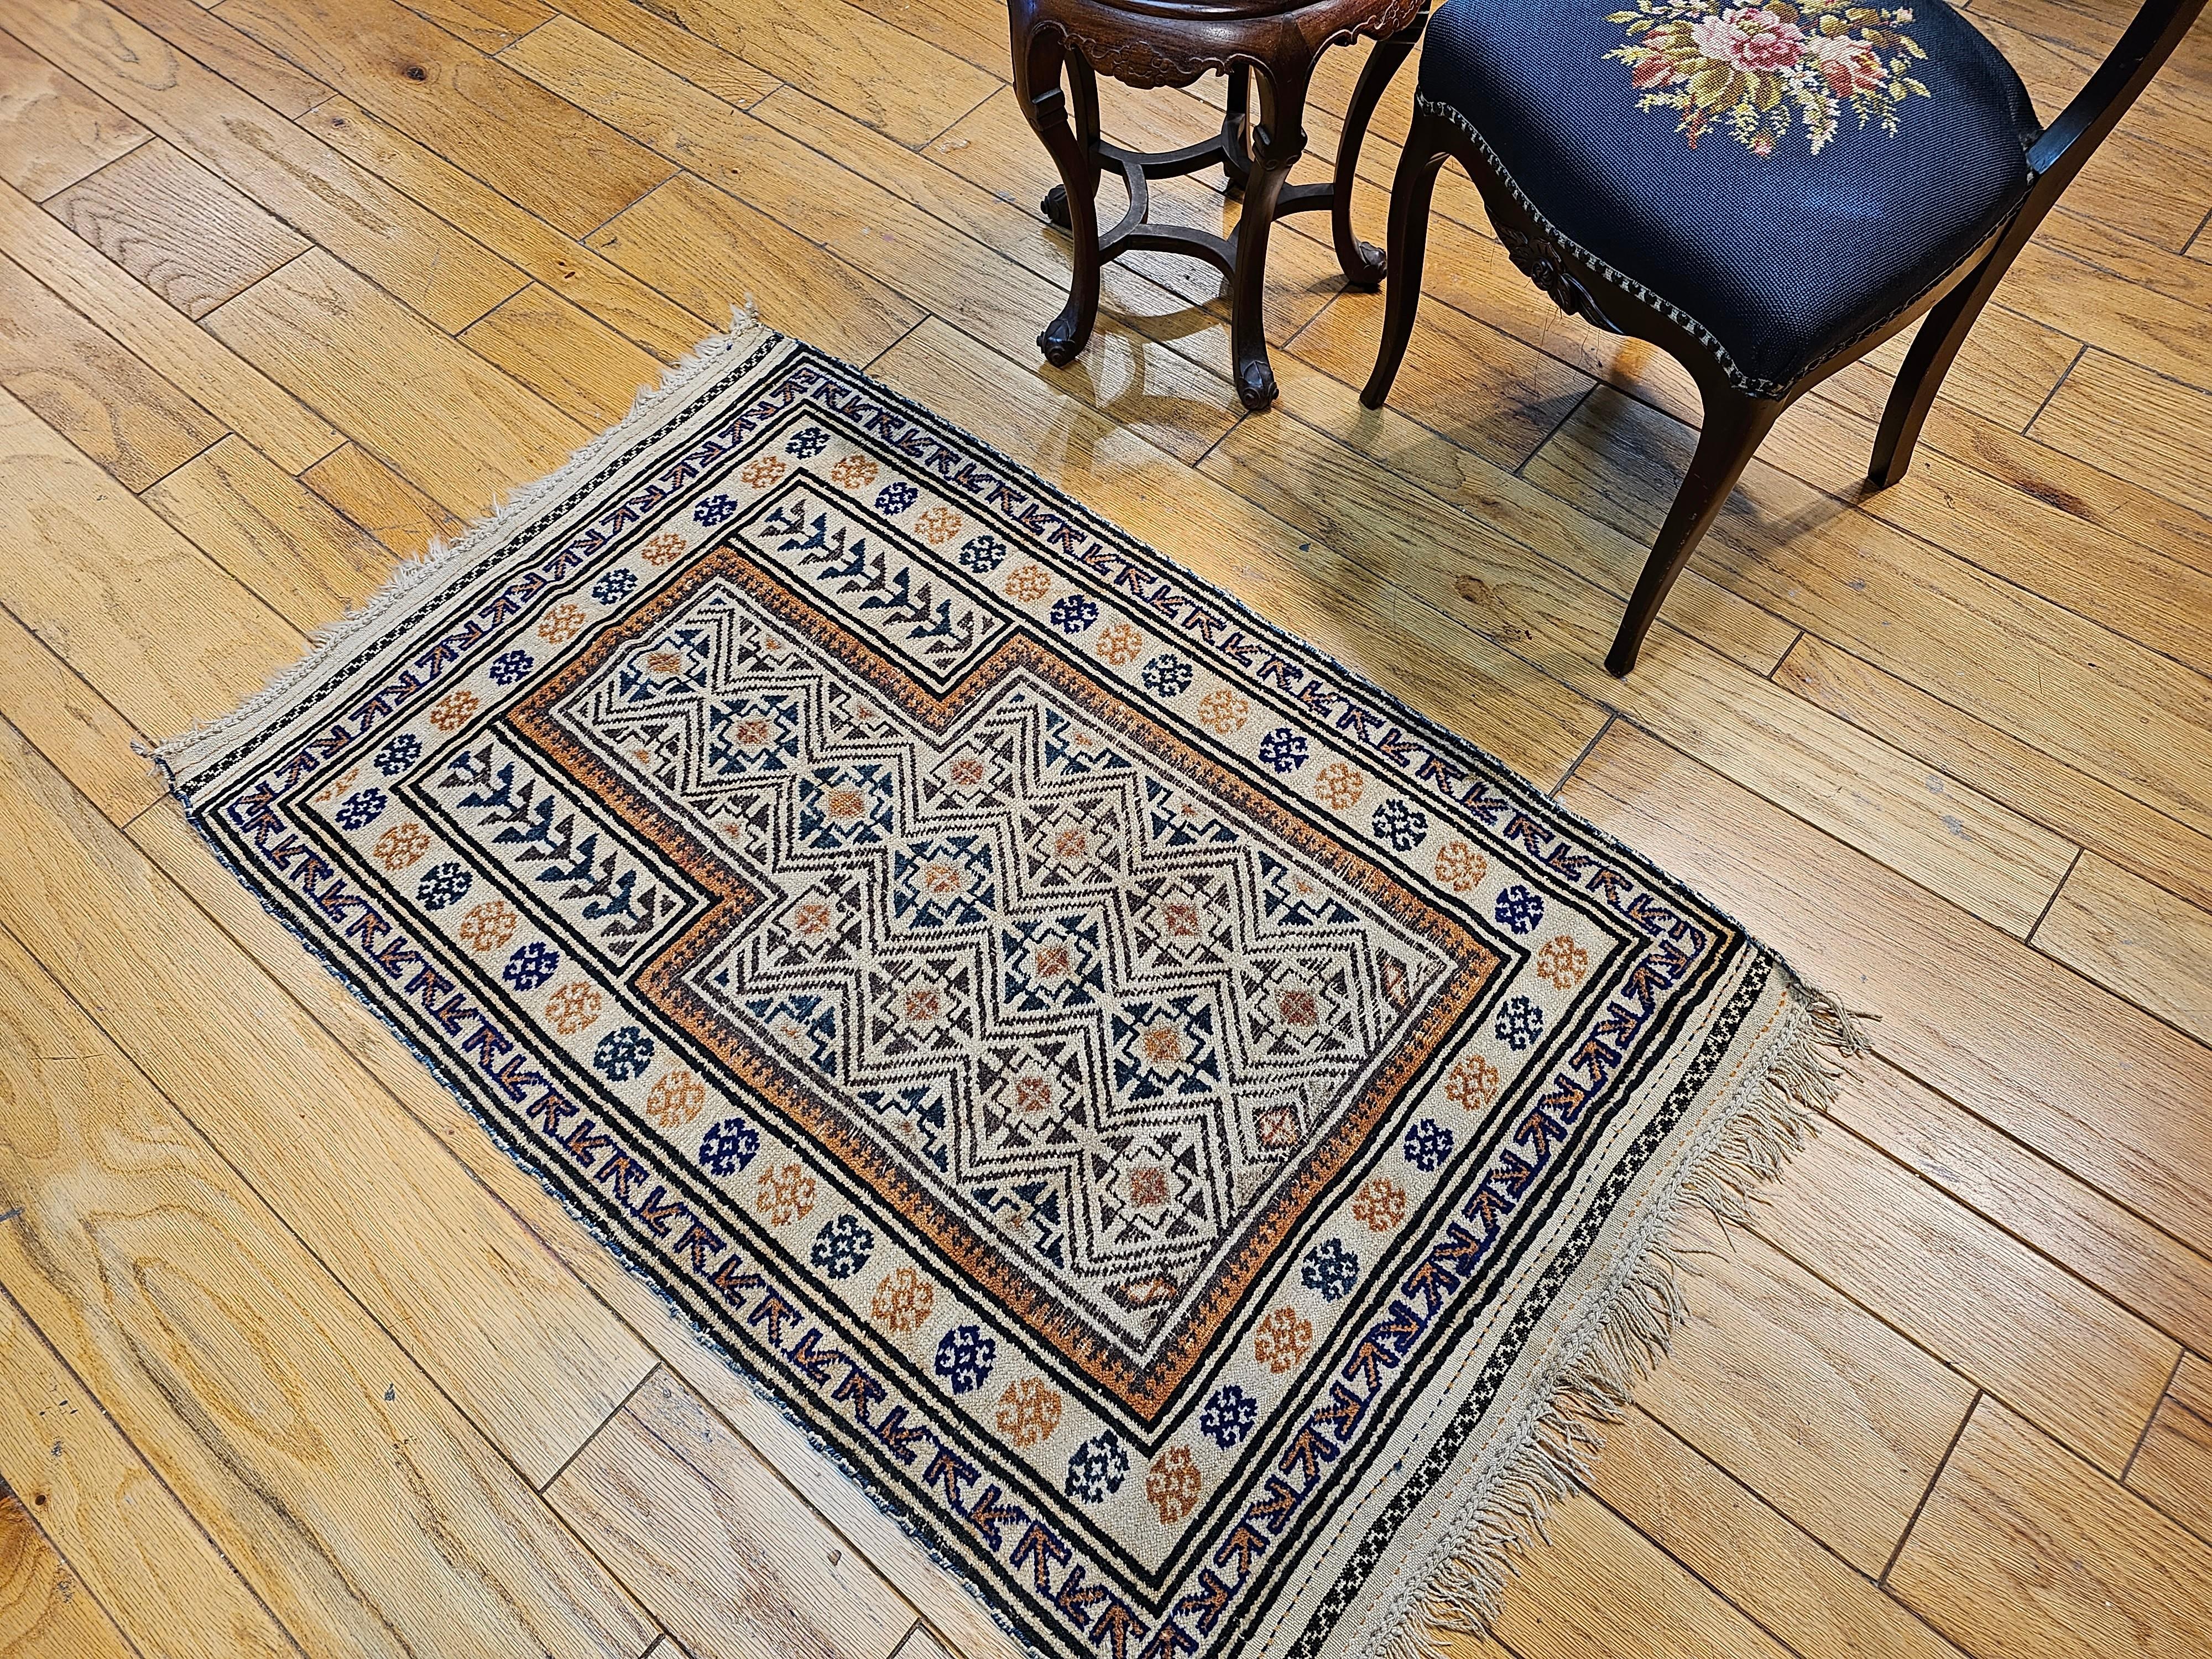 Early 20th Century Persian Baluch Prayer Rug Pattern in Ivory, Brown, Navy Blue For Sale 3